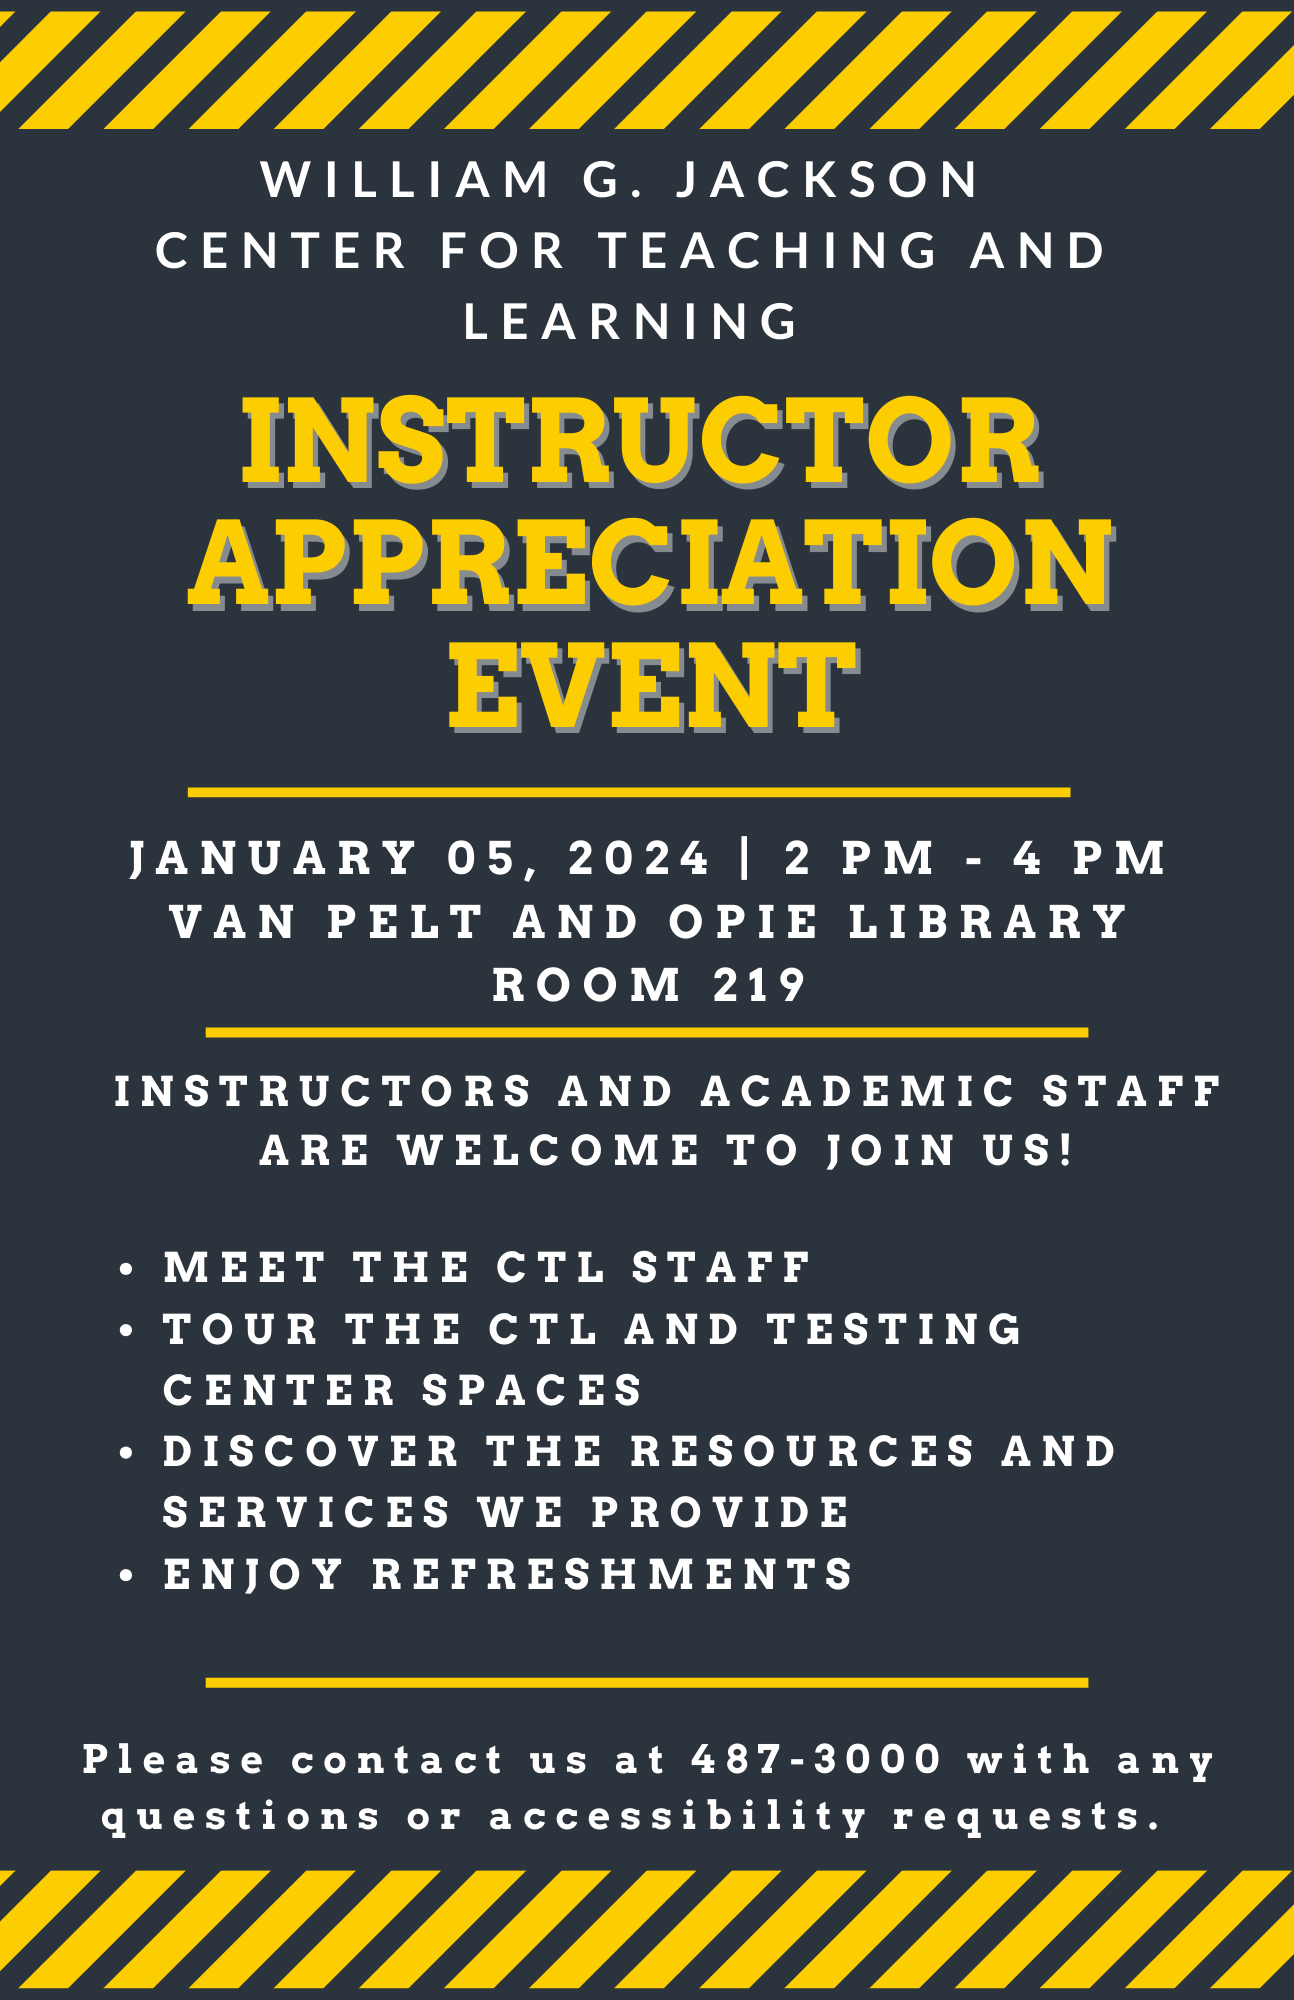 Event Flyer William G. Jackson Center for Teaching and Learning instructor Appreciation Event. January 5, 2024 2:00 p.m. -4:00 p.m. Room 219 of the Van Pelt/Opie Library Instructors and Academic Staff are welcome to join us! Meet the CTL staff, tour the CTL and testing center spaces, discover the resources and services we provide, enjoy refreshments. Please contact us at 487-3000 with any questions or accessibility requests. The remainder of the notice is decoration.